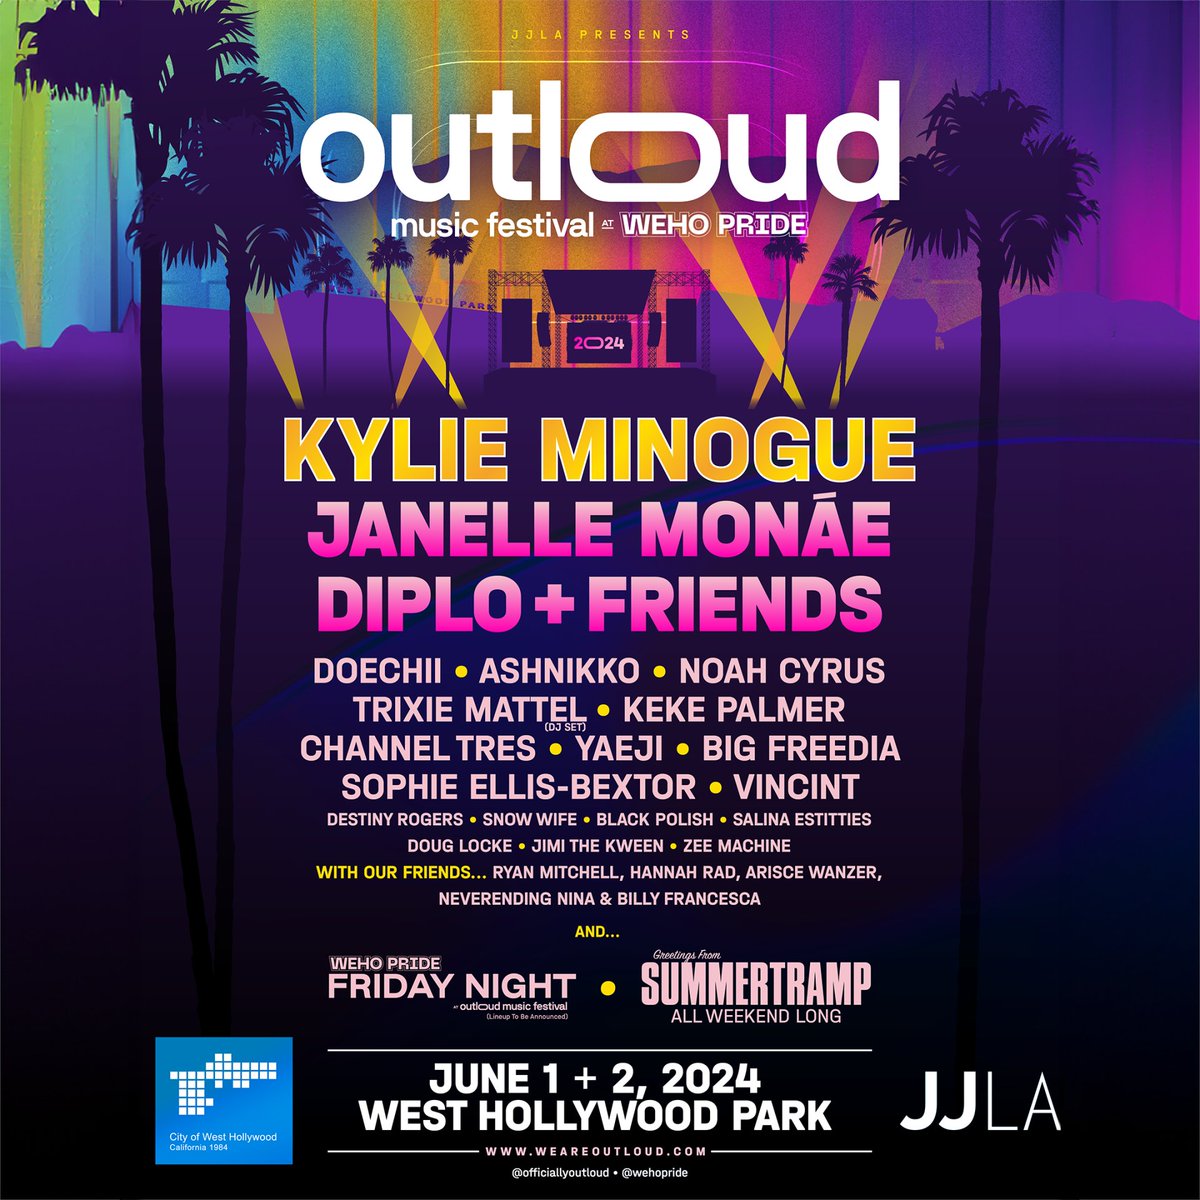 The lineup for OUTLOUD Music Festival @ WeHo Pride 2024 is here, and it's QUEERER than ever! ✨ Deets at wehopride.com 👀